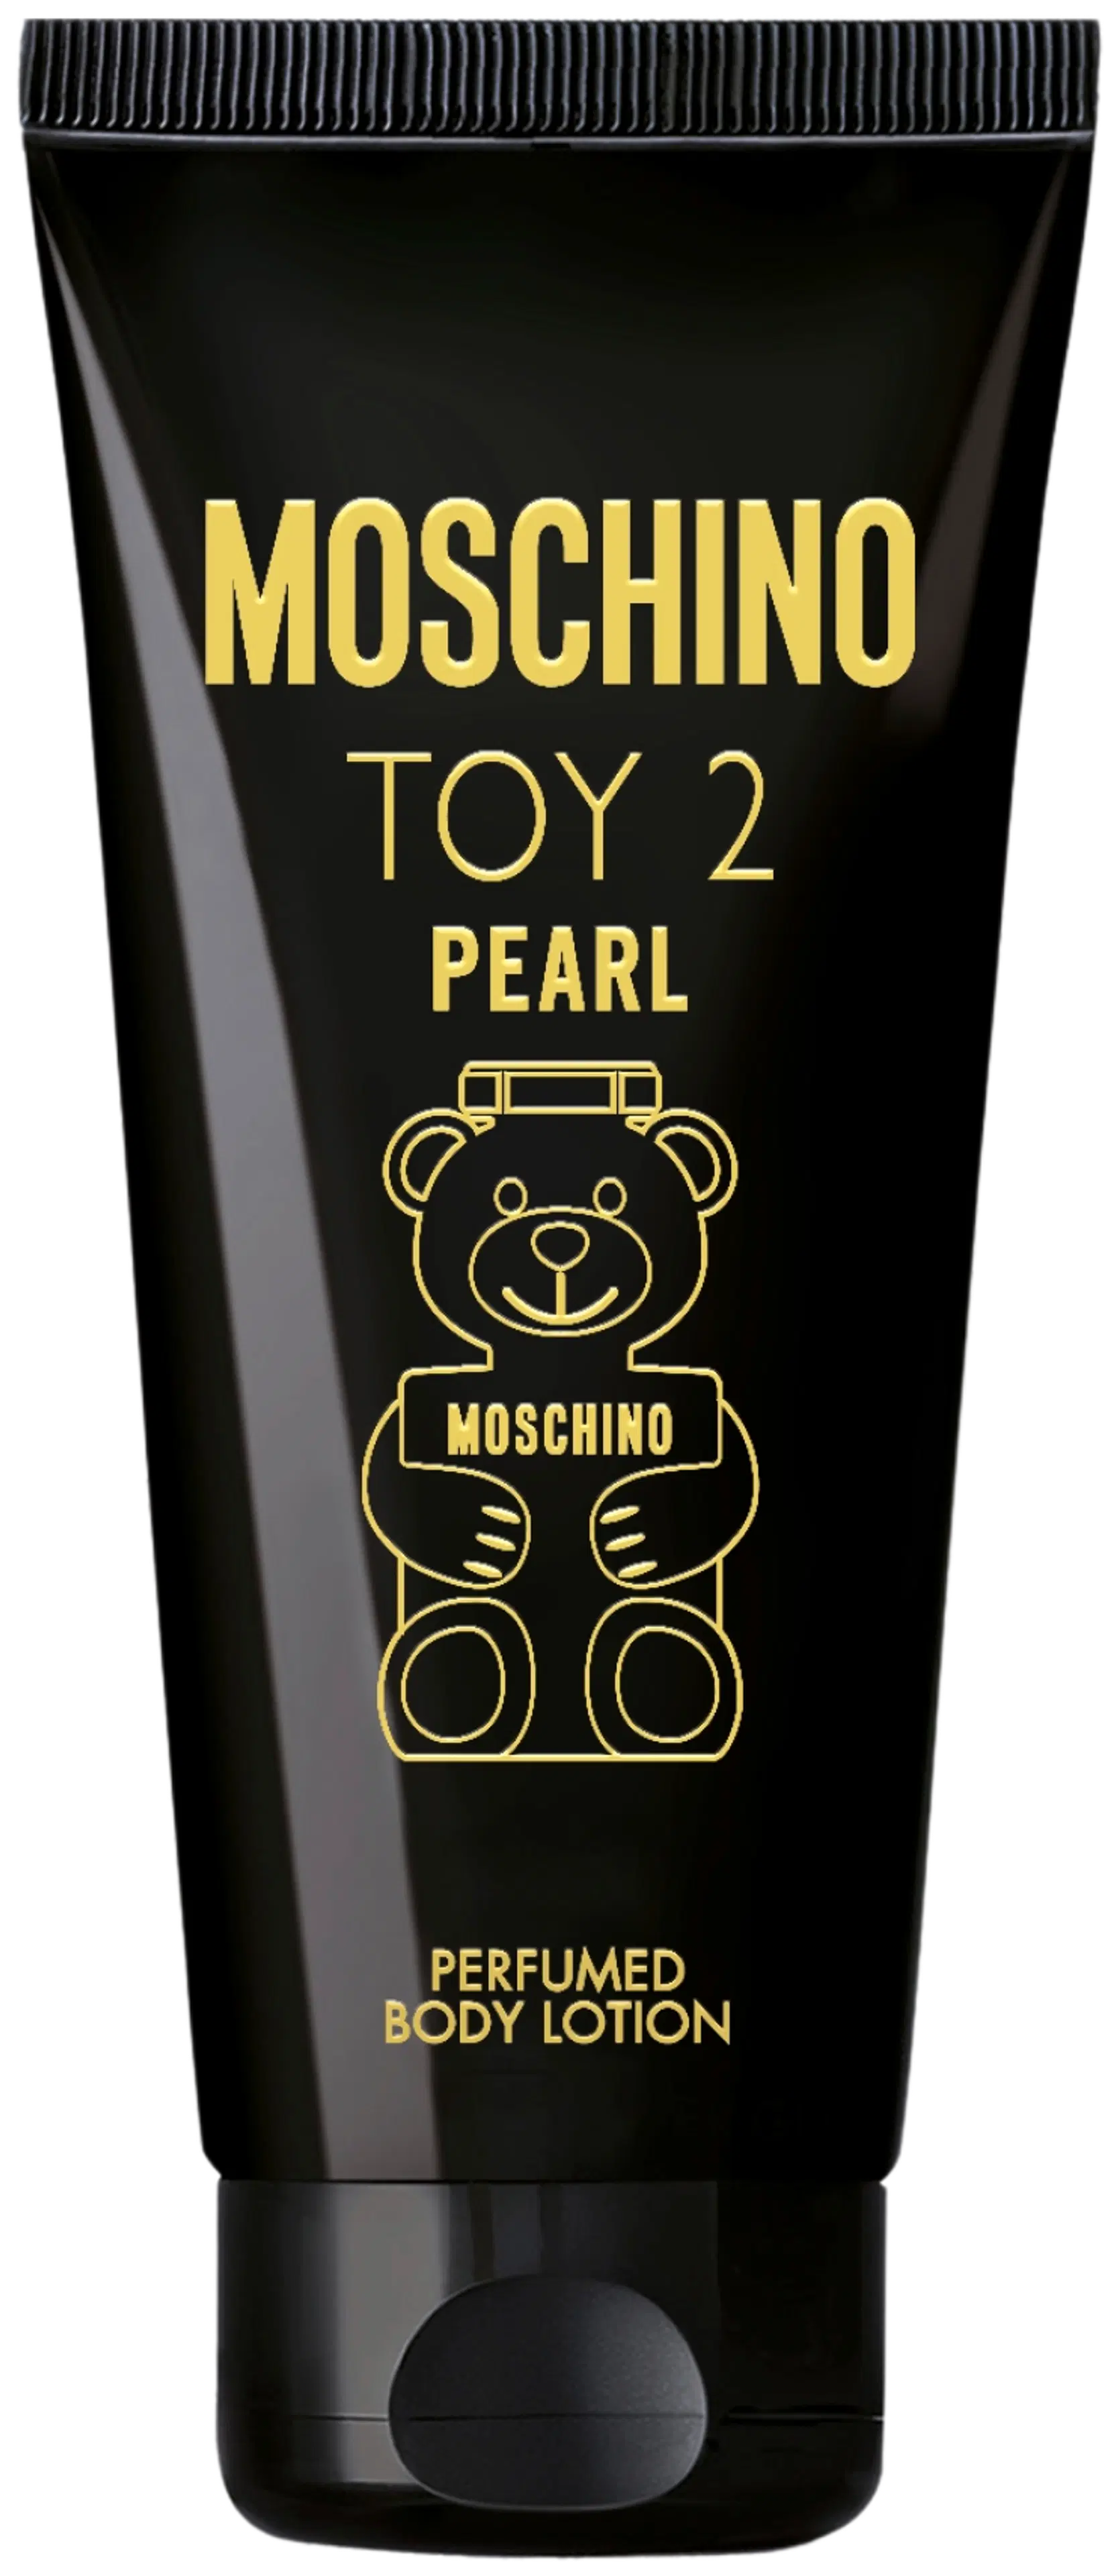 Moschino Toy 2 Pearl Body Lotion 200 ml